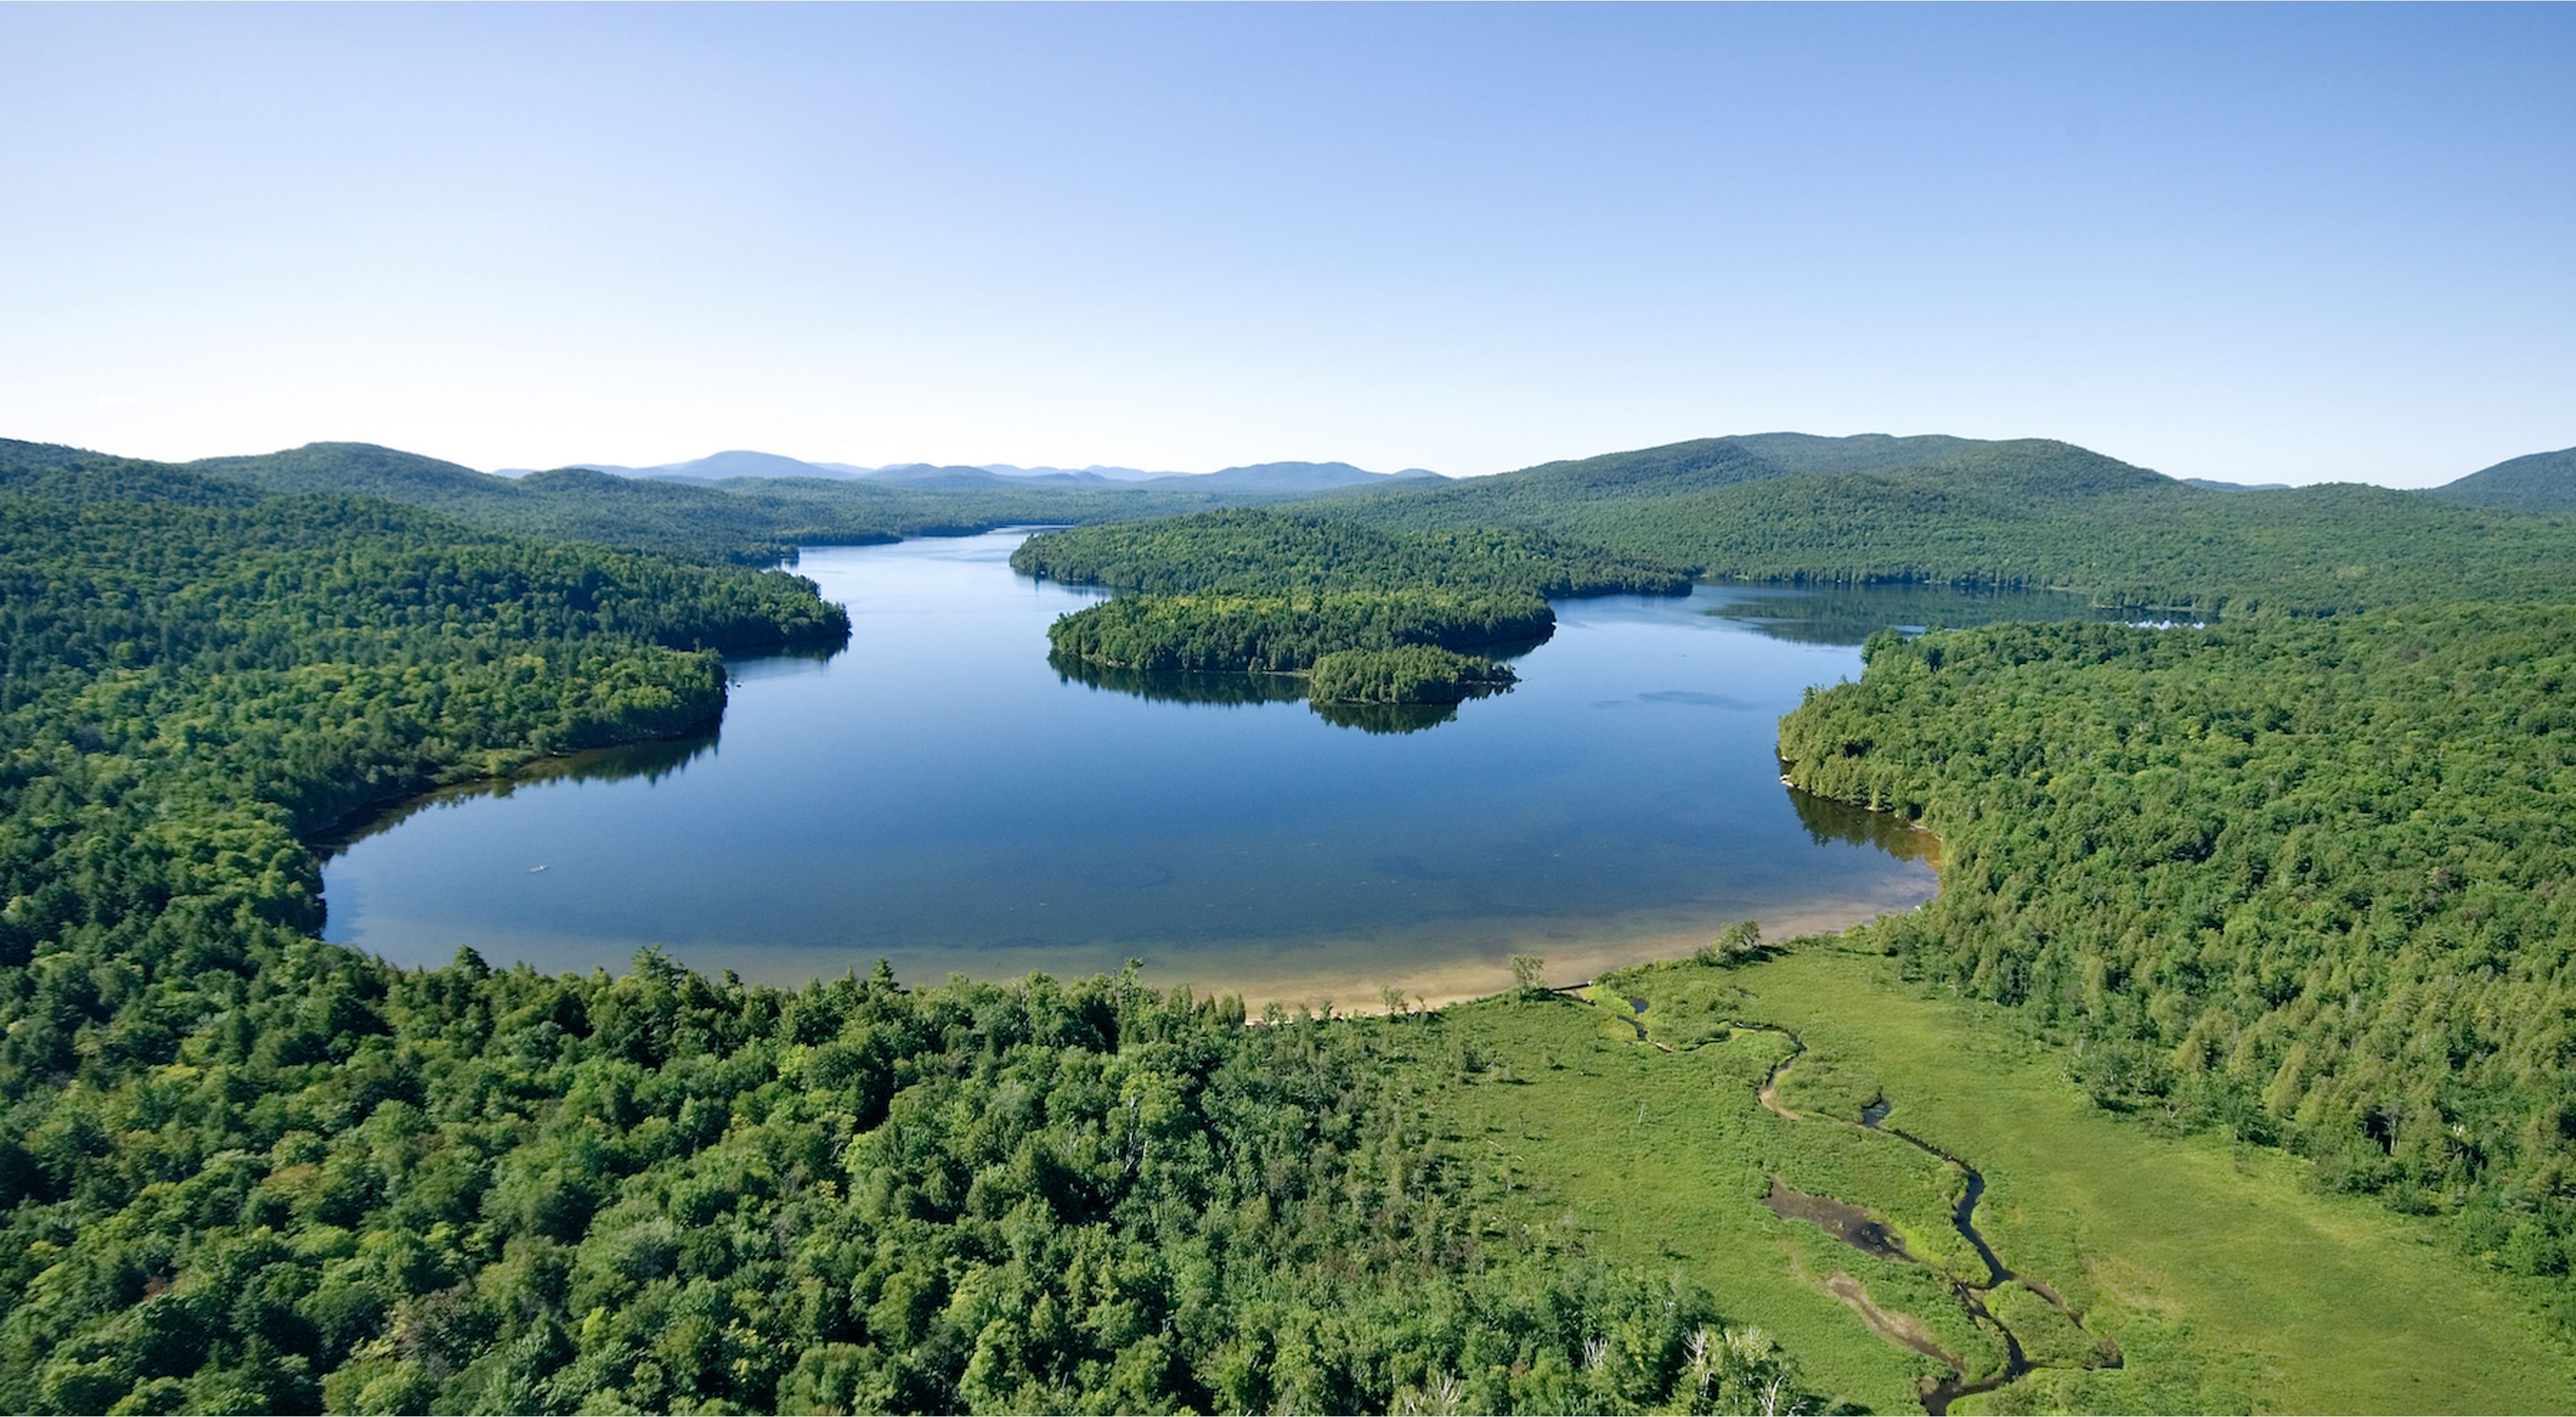 An aerial view of Follensby Pond.